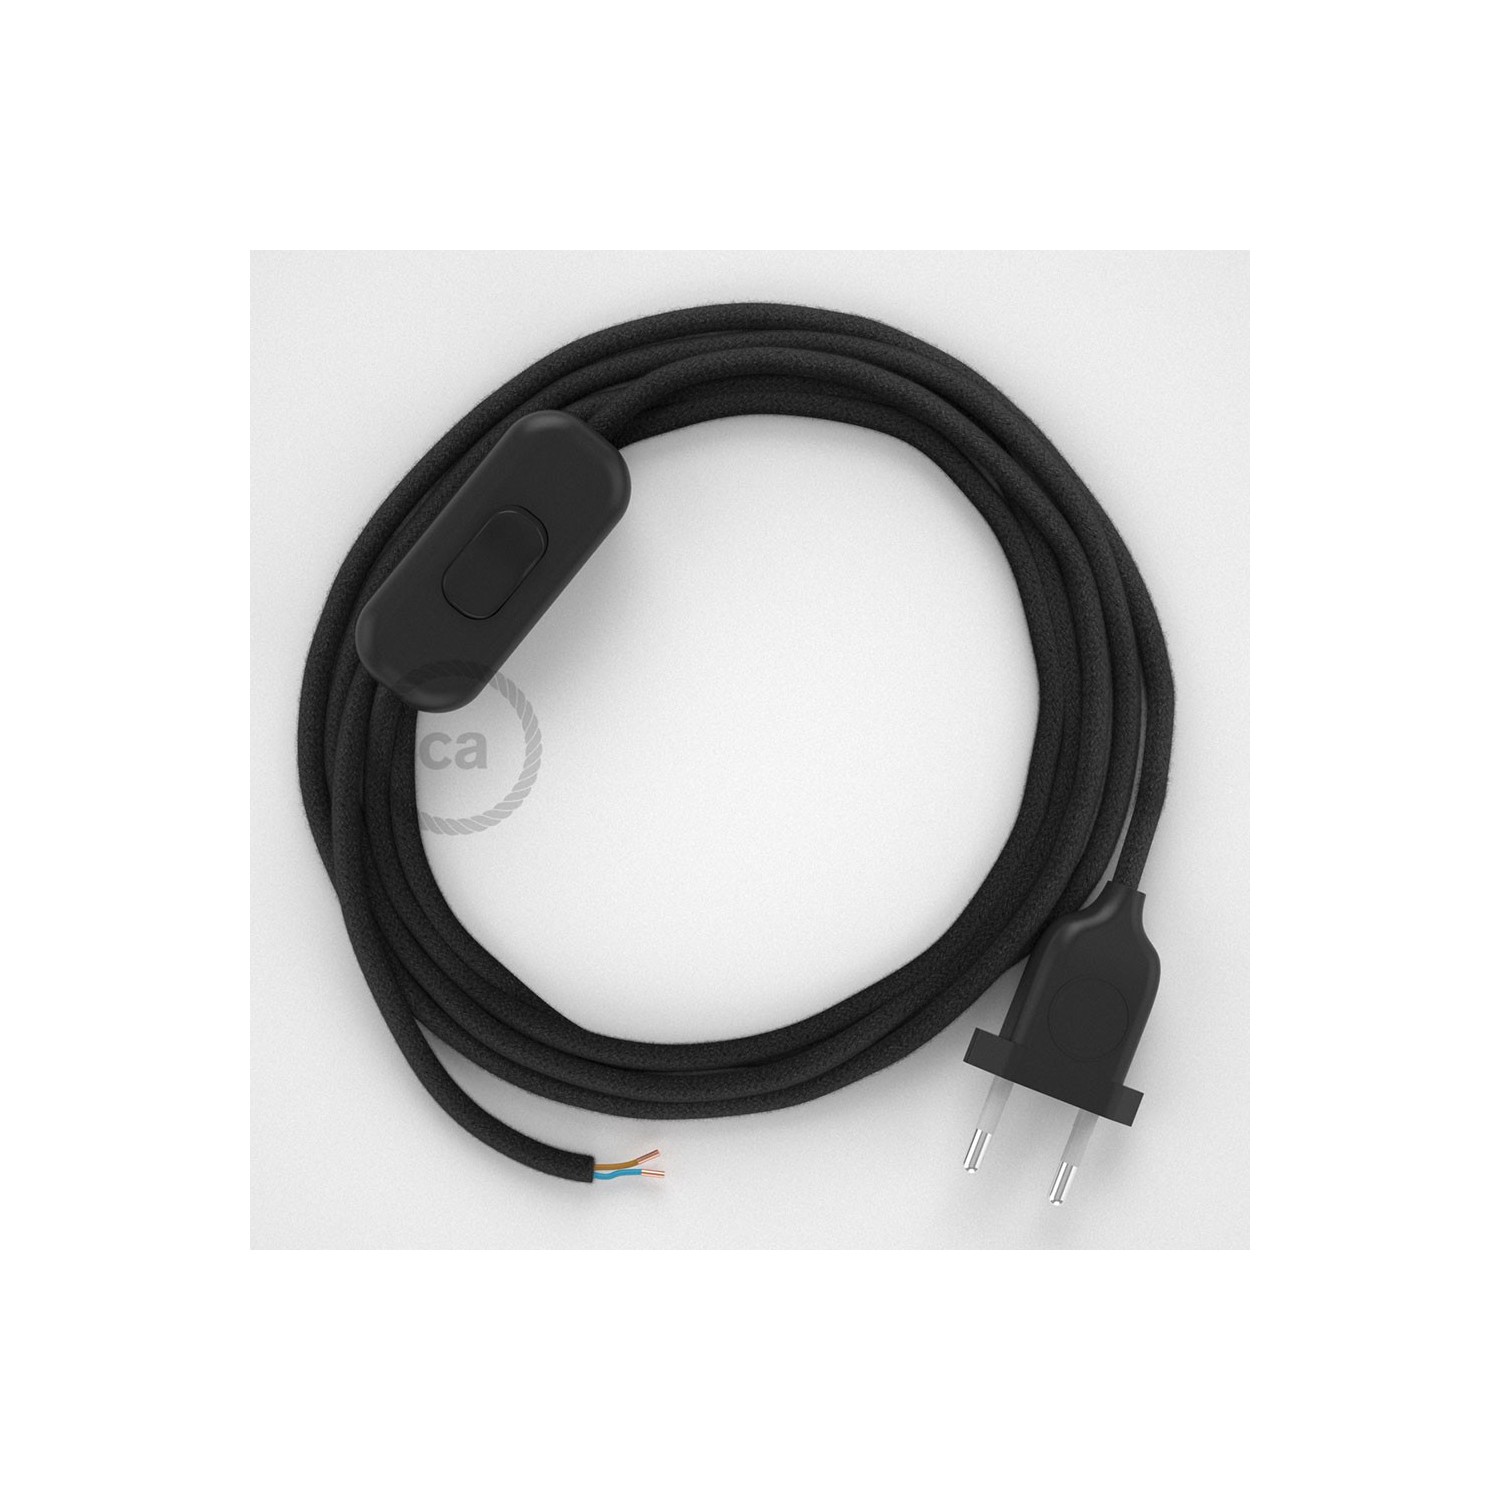 Lamp wiring, RC04 Black Cotton 1,80 m. Choose the colour of the switch and plug.